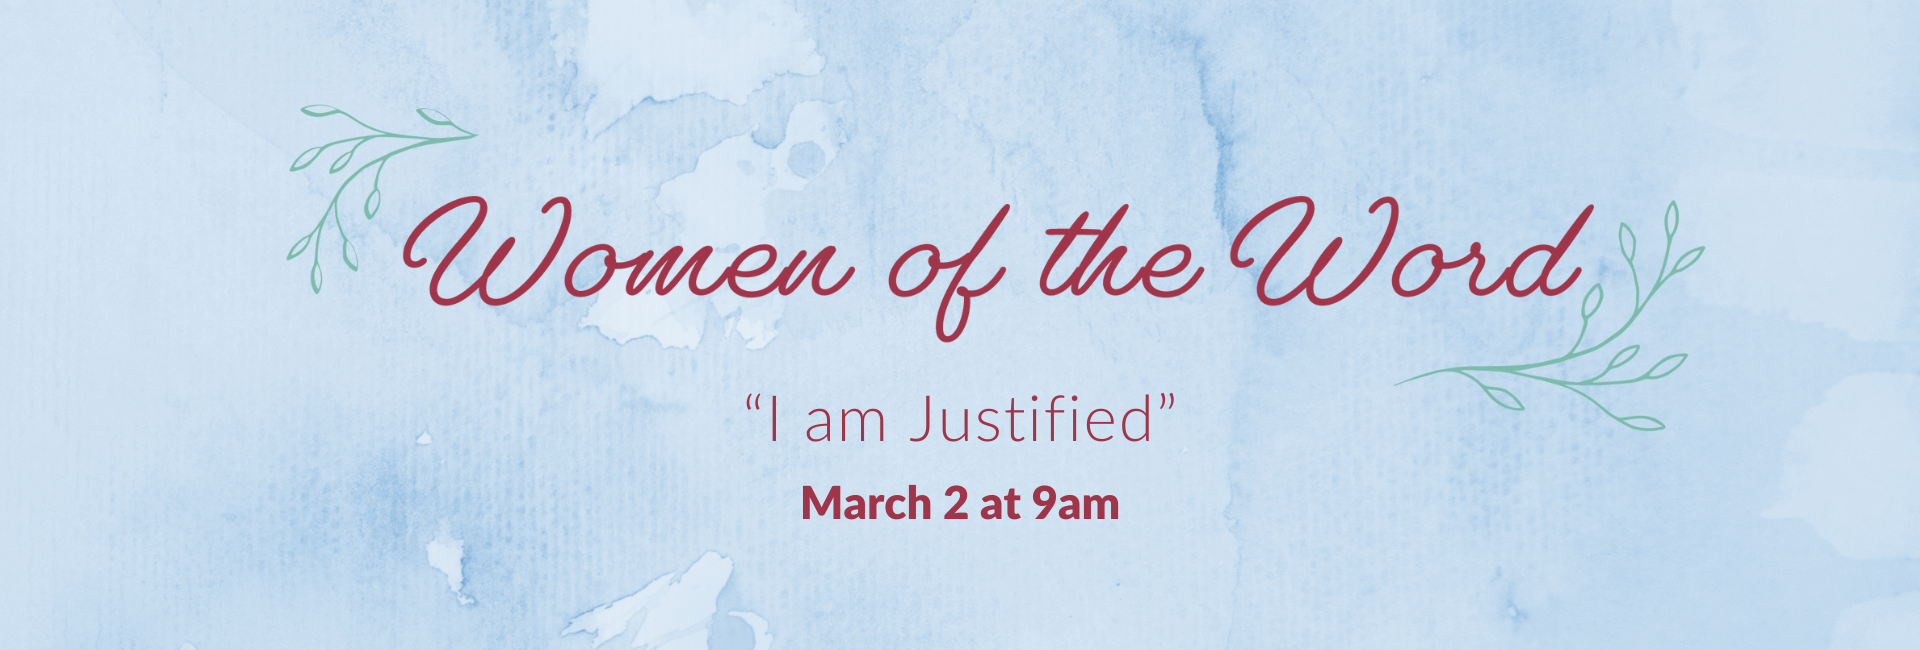 Women of the Word, "I am Justified"